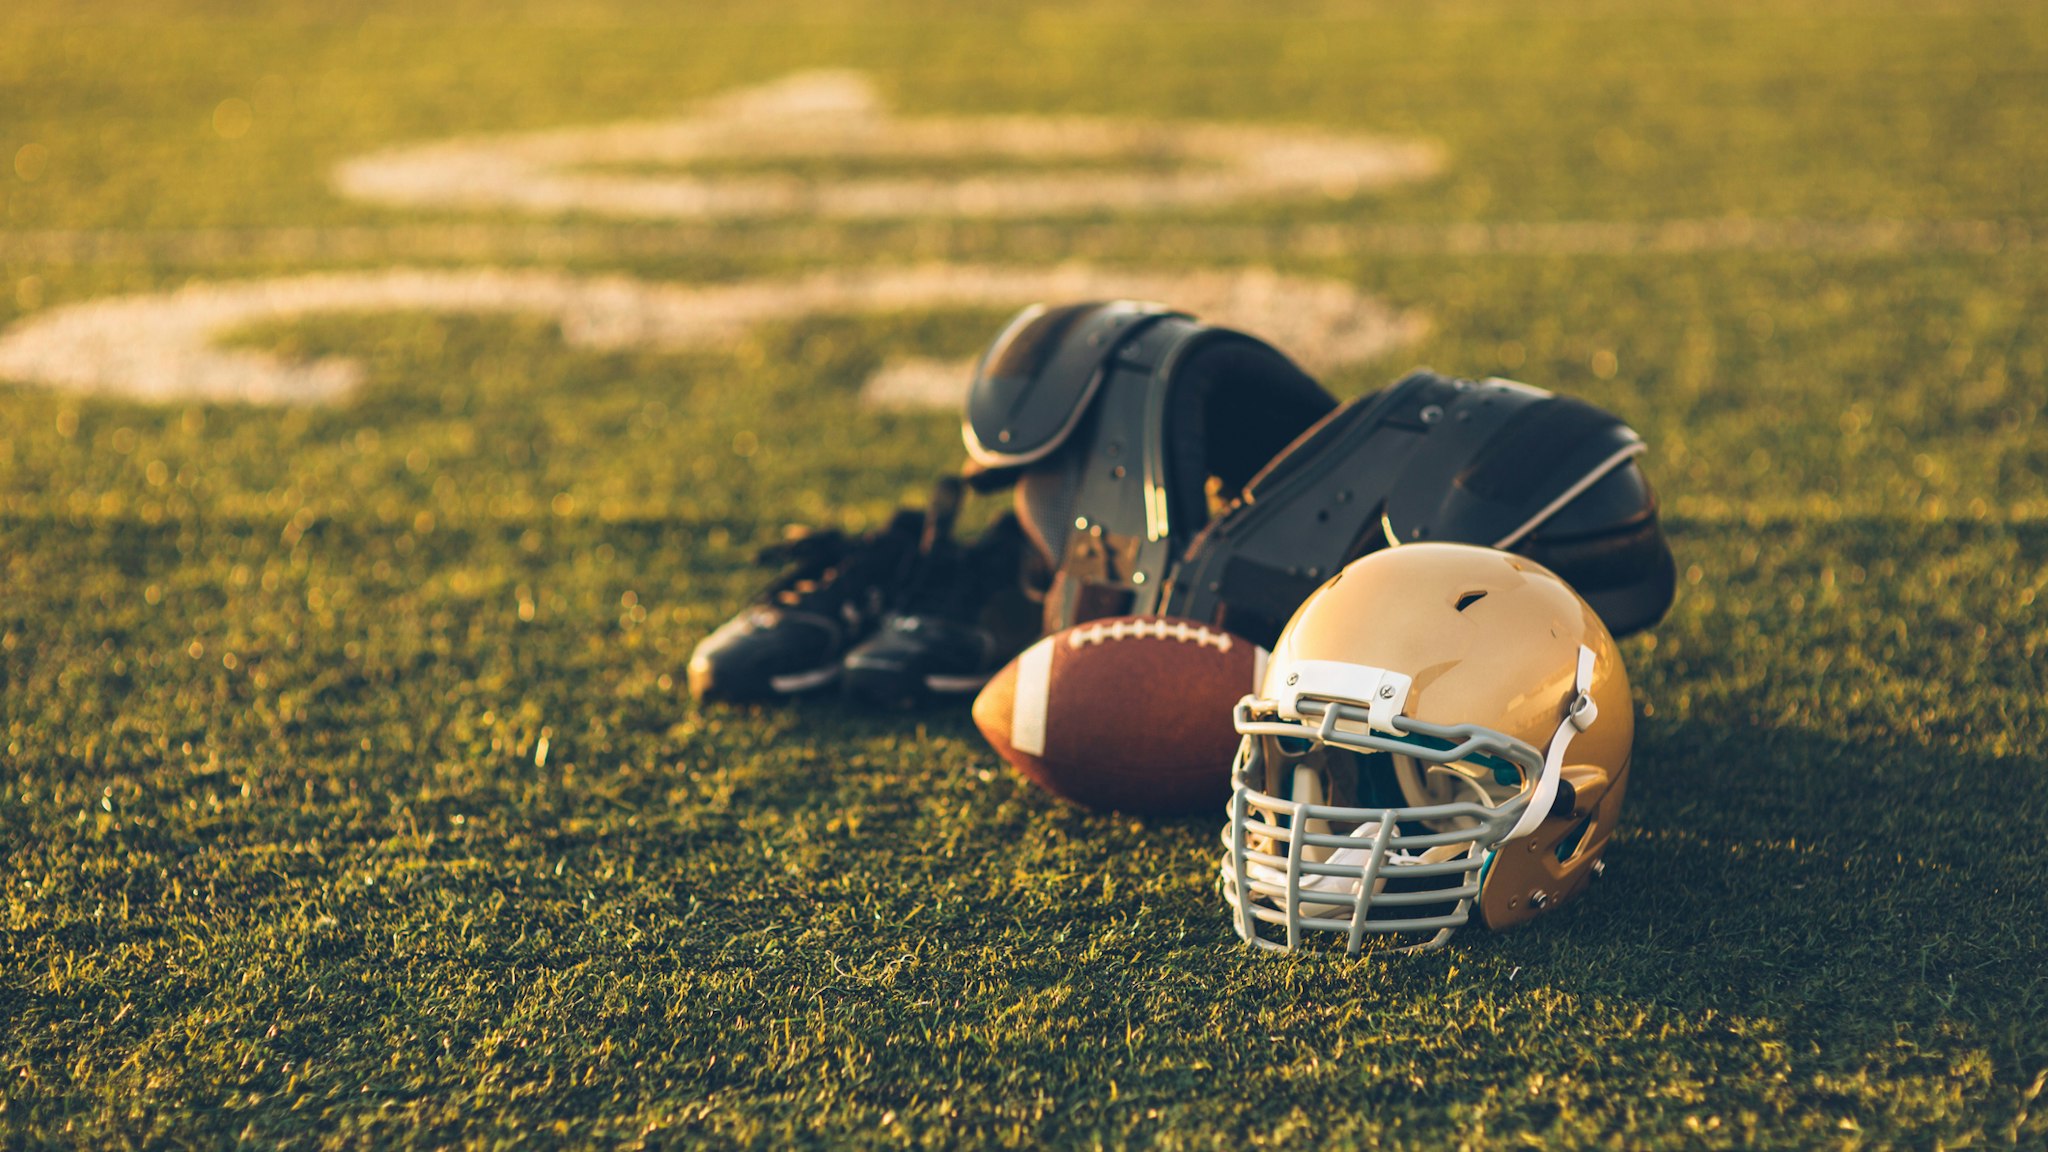 A Gold American Football helmet sits with a football on a football playing field. The light is from the sun which is about to set, shallow depth of field. Copy space included. Sport background image.